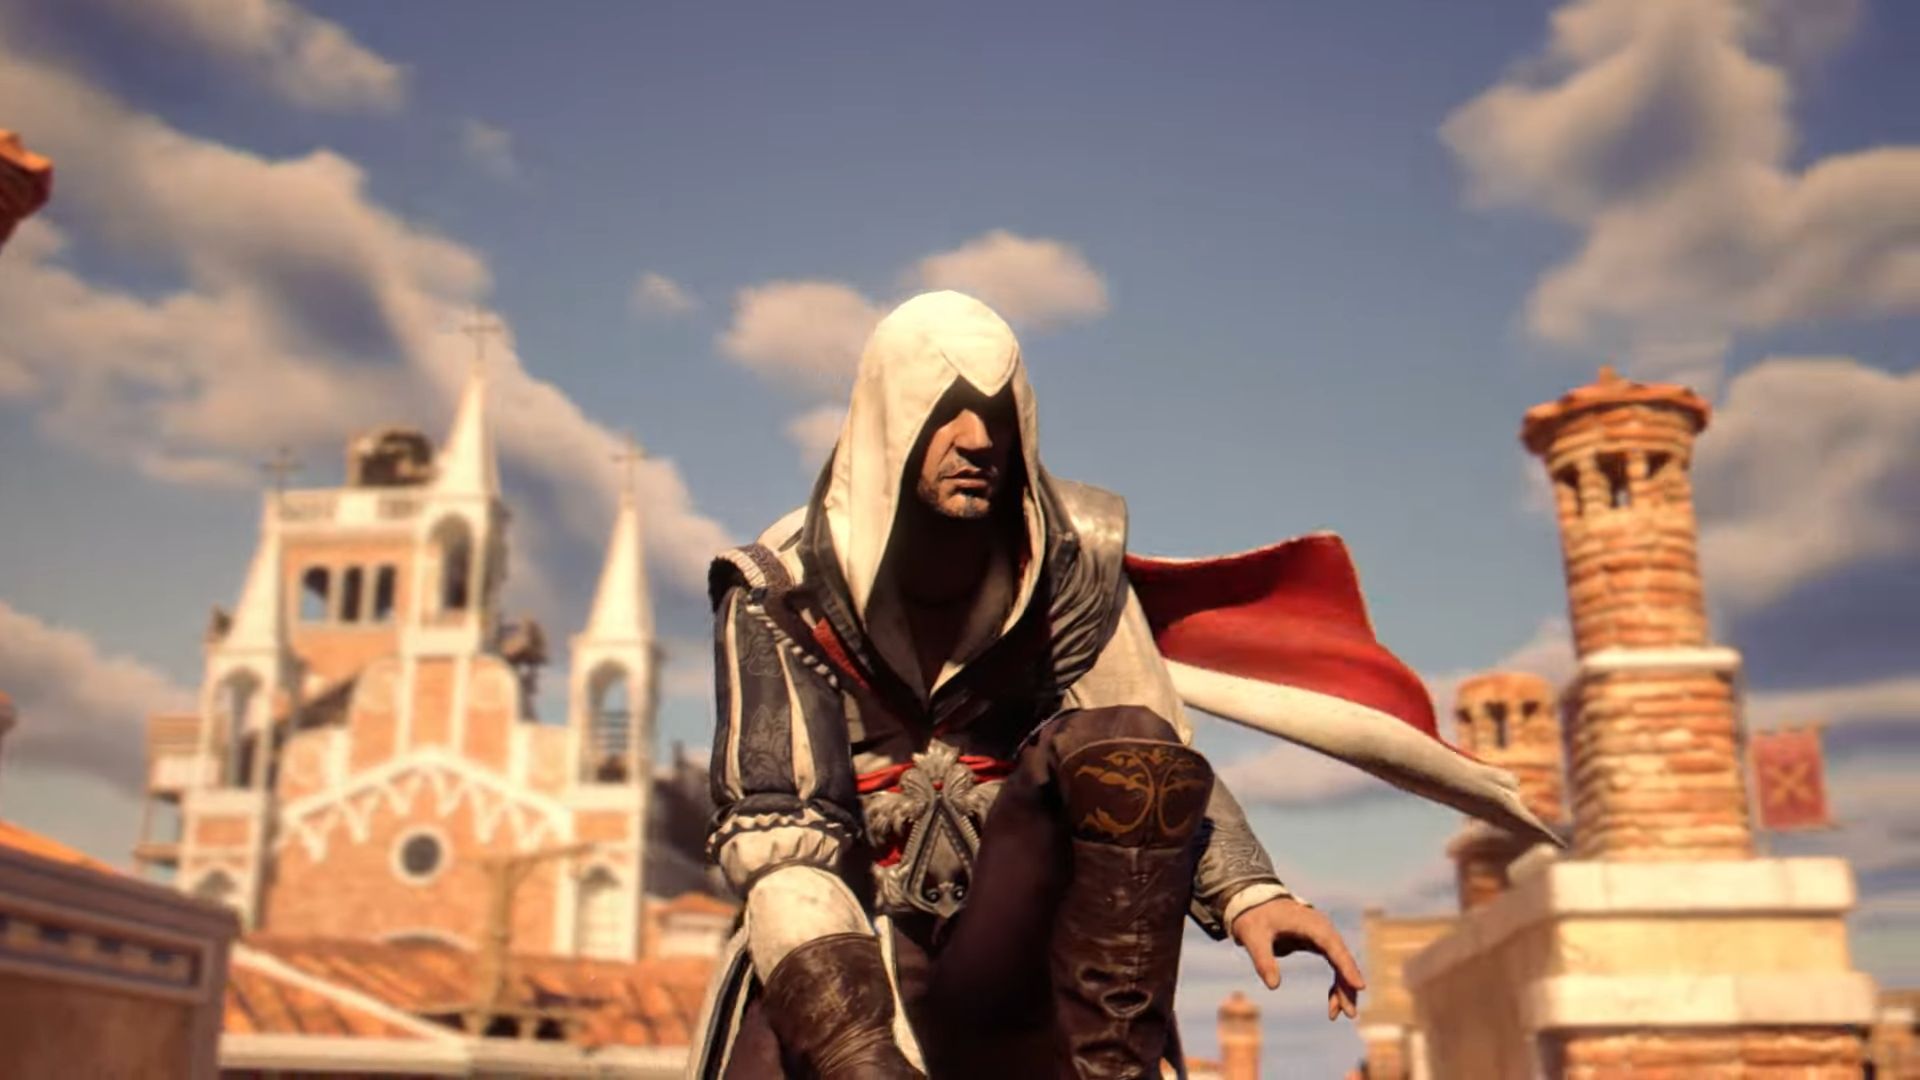 Ezio in Assassins Creed Nexus VR atop a building with city in the background